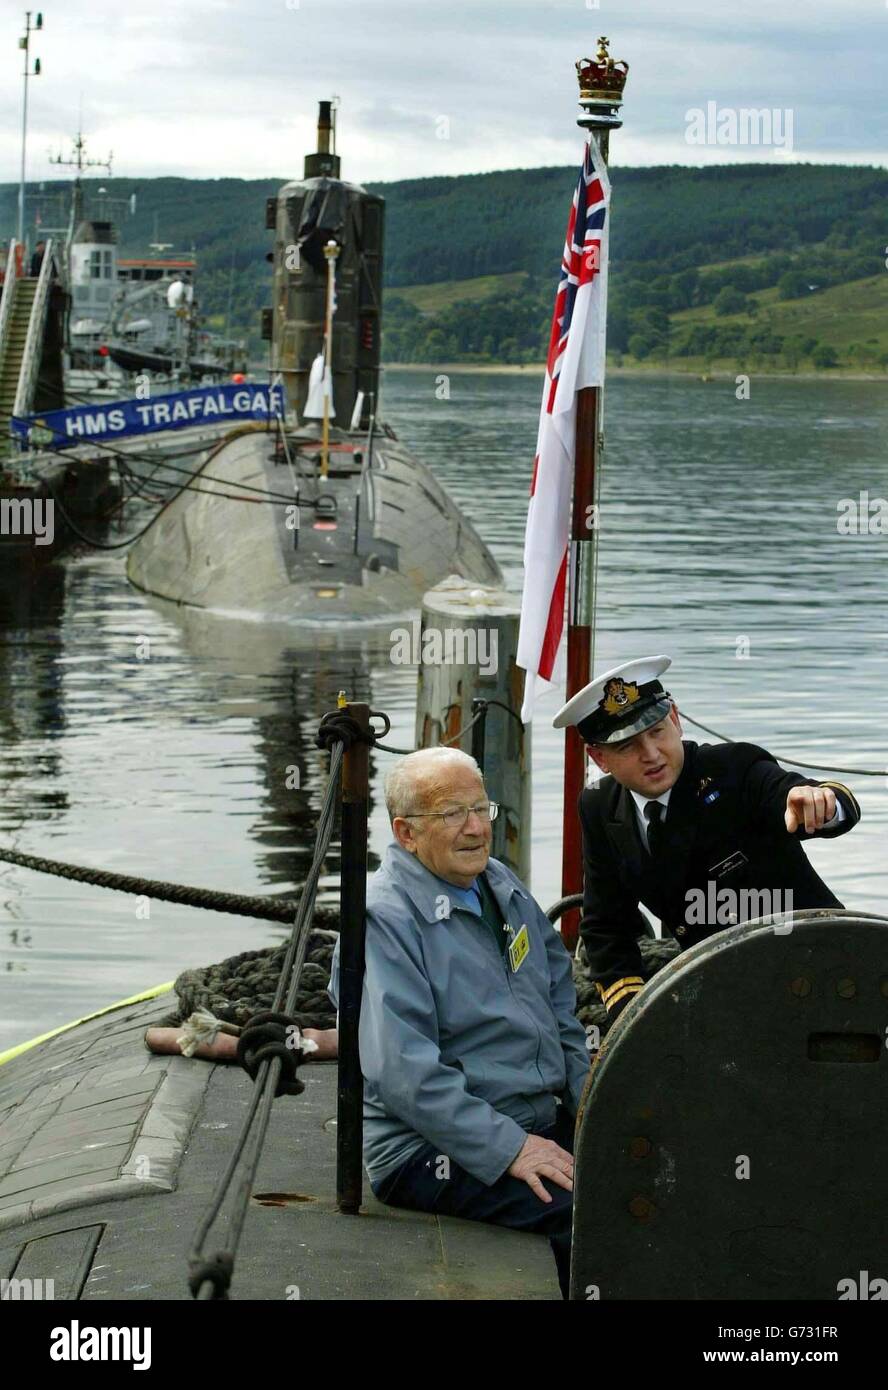 Former German navy officer Max Quietsch, 81, with Lieutenant Grant McBrattney during his tour of the Royal Navy's HMS Sovereign hunter-killer nuclear submarine at the Faslane naval base in the Clyde. The trip, for the U-boat veteran who narrowly escaped death when his vessel was blown out of the water, was organised by his son Paul and daughter-in-law Helen as a special treat for his birthday. Stock Photo